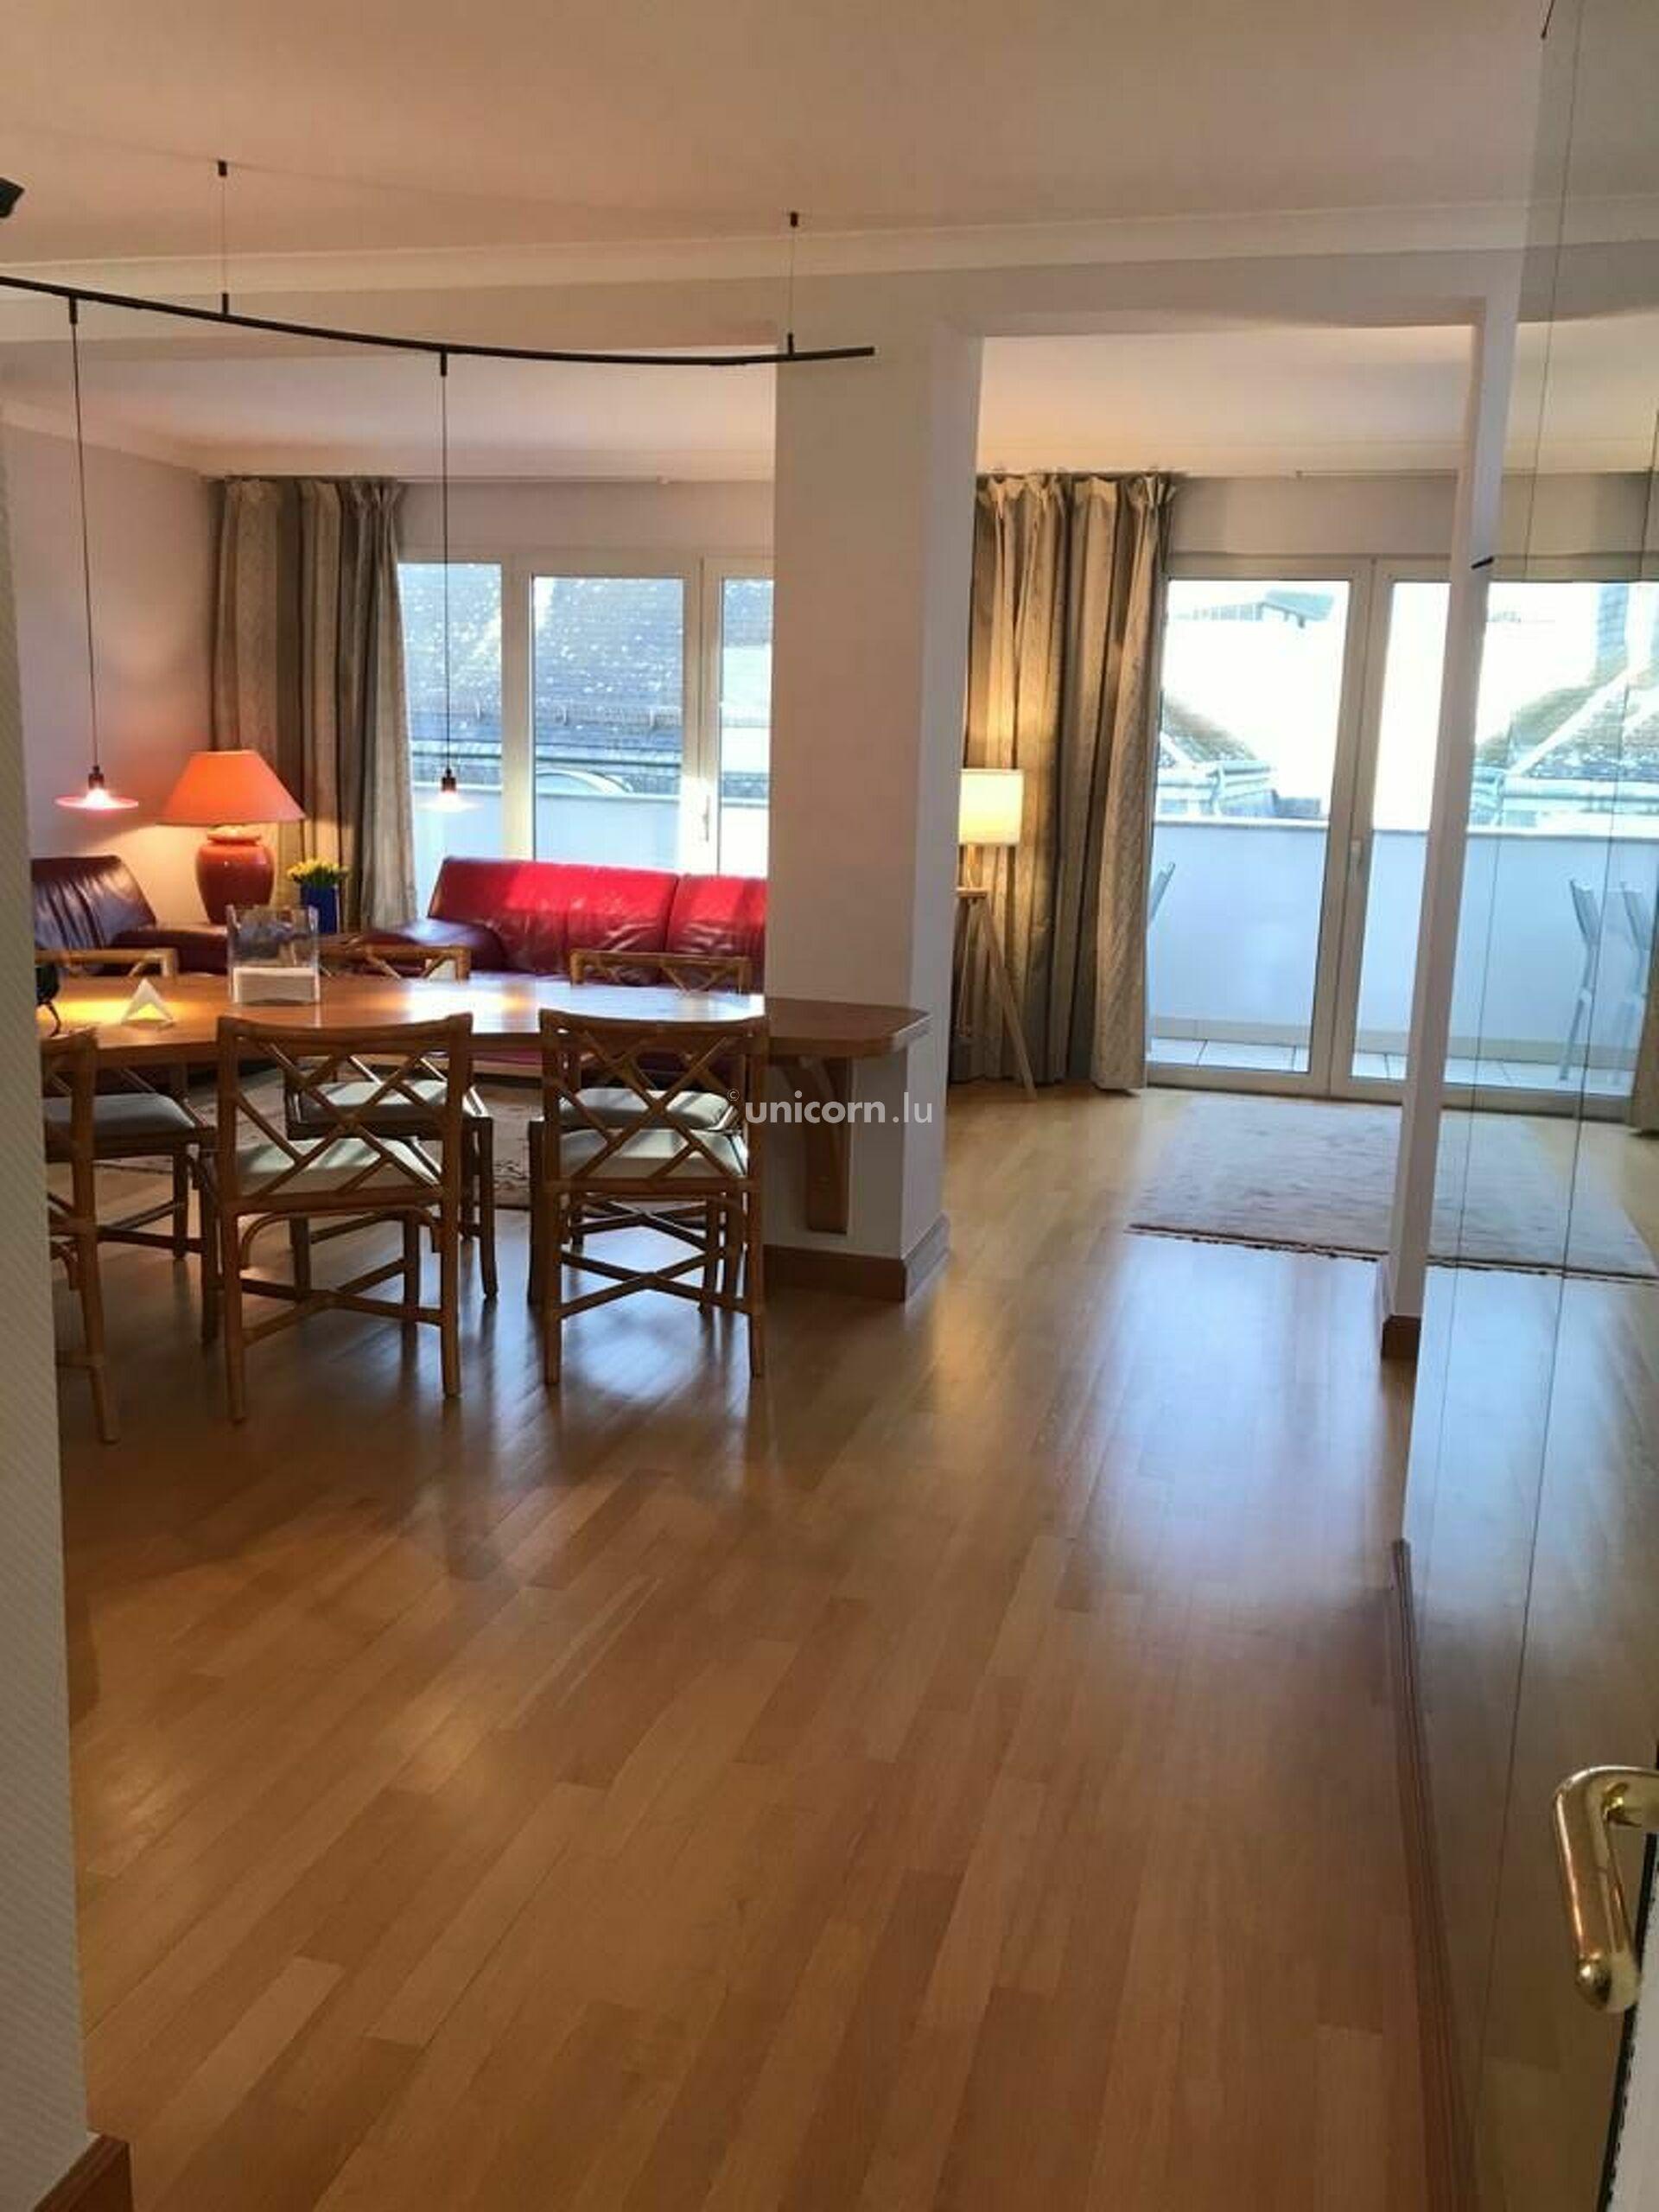 Apartment for rent in Luxembourg  - 75m²